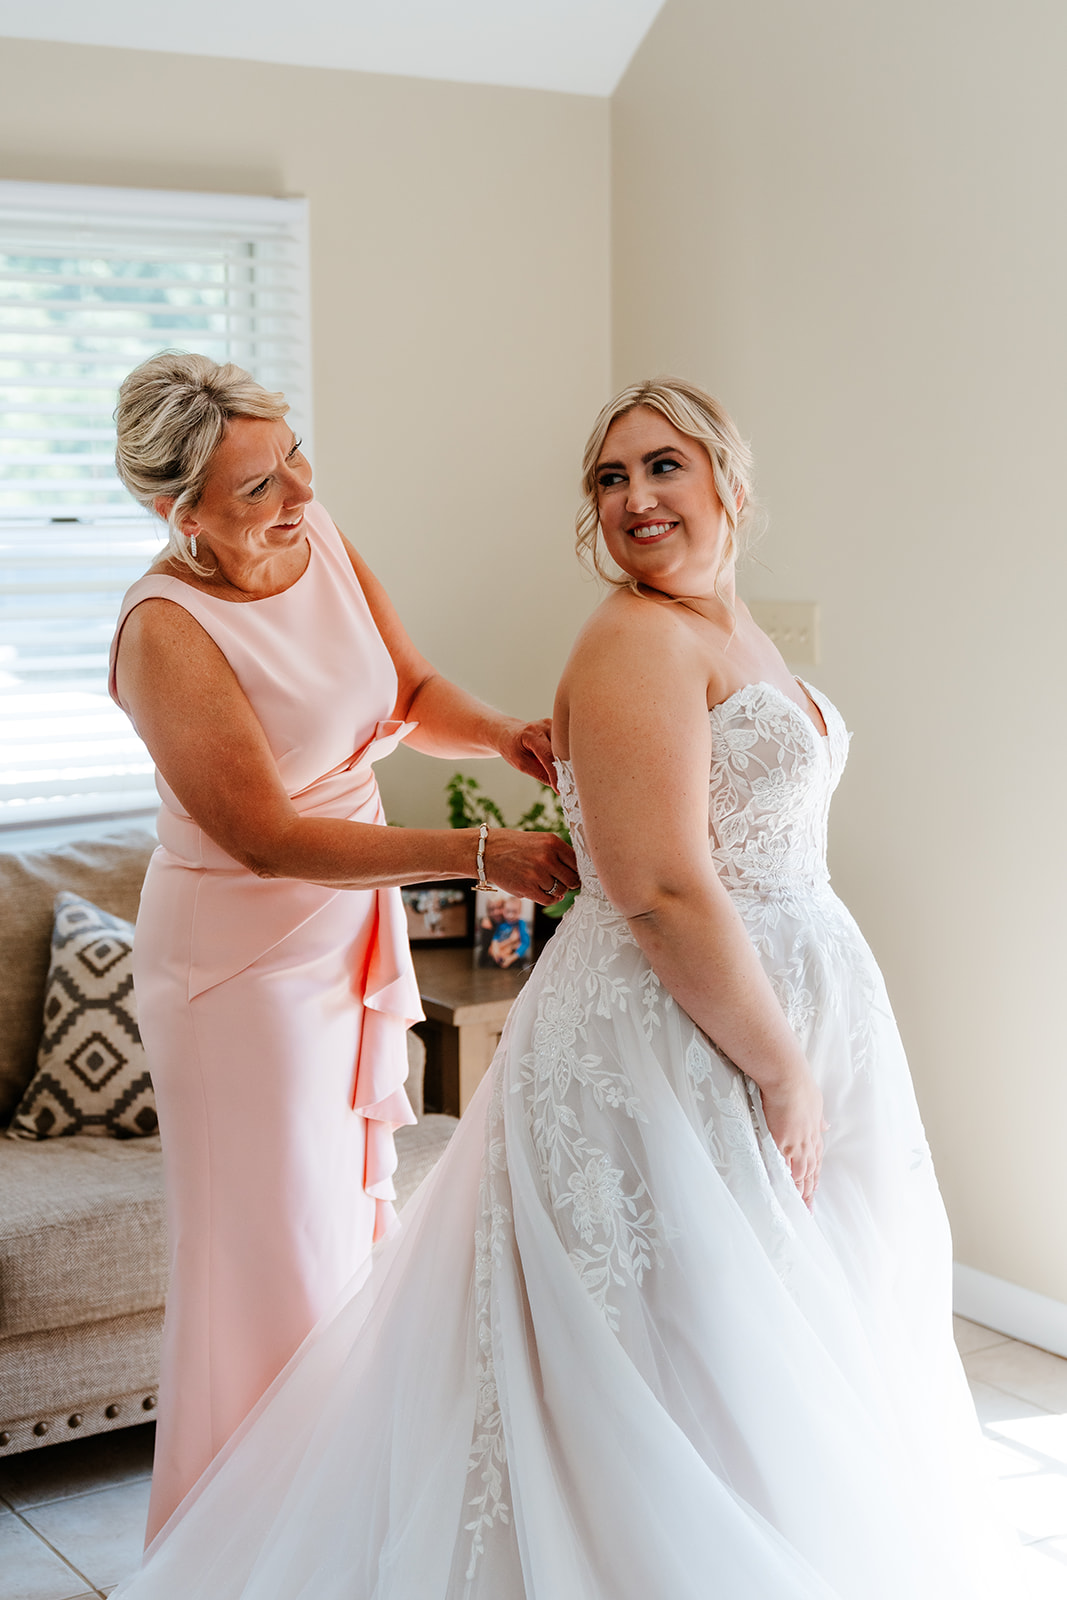 A woman in a peach dress assisting a bride in a white wedding gown, preparing for a wedding ceremony at lakeview pavilion